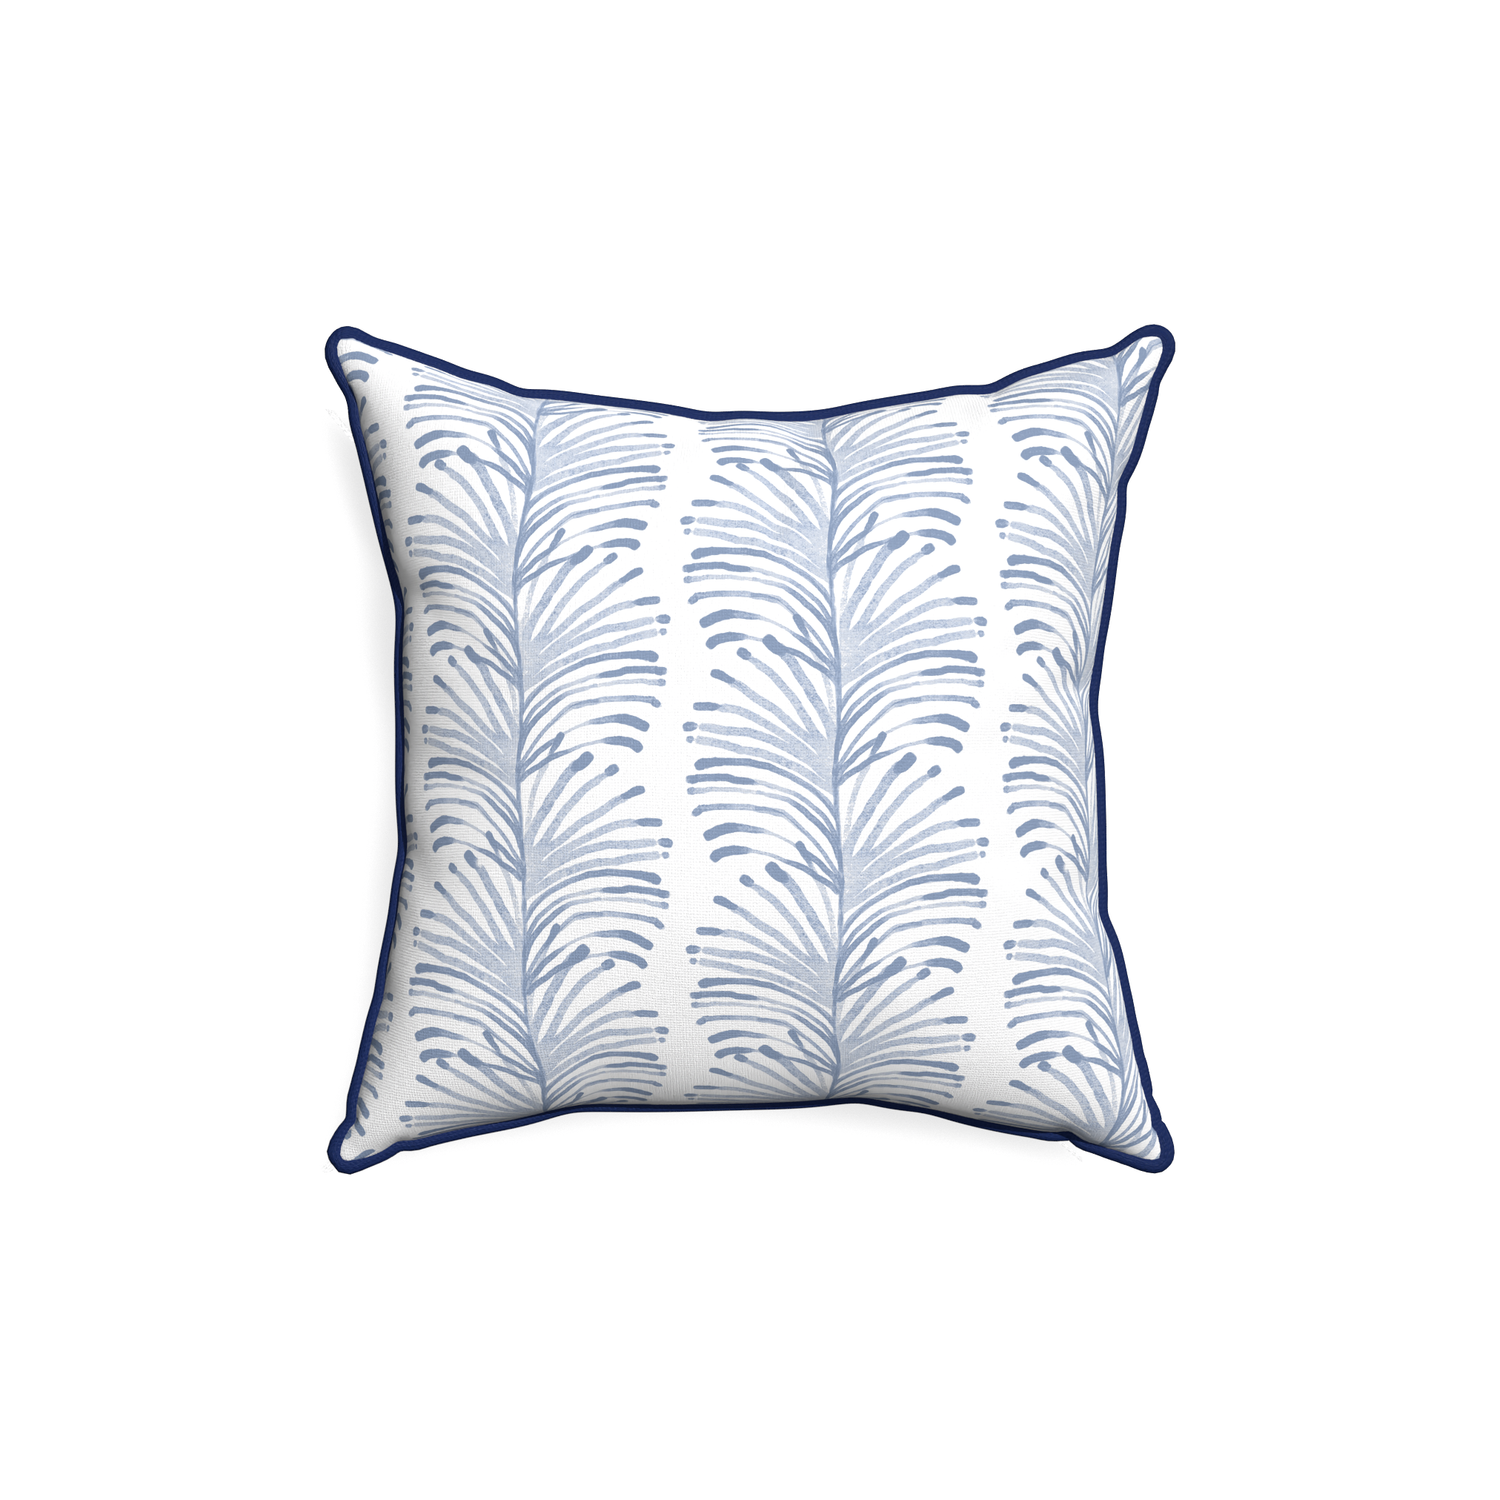 18-square emma sky custom sky blue botanical stripepillow with midnight piping on white background